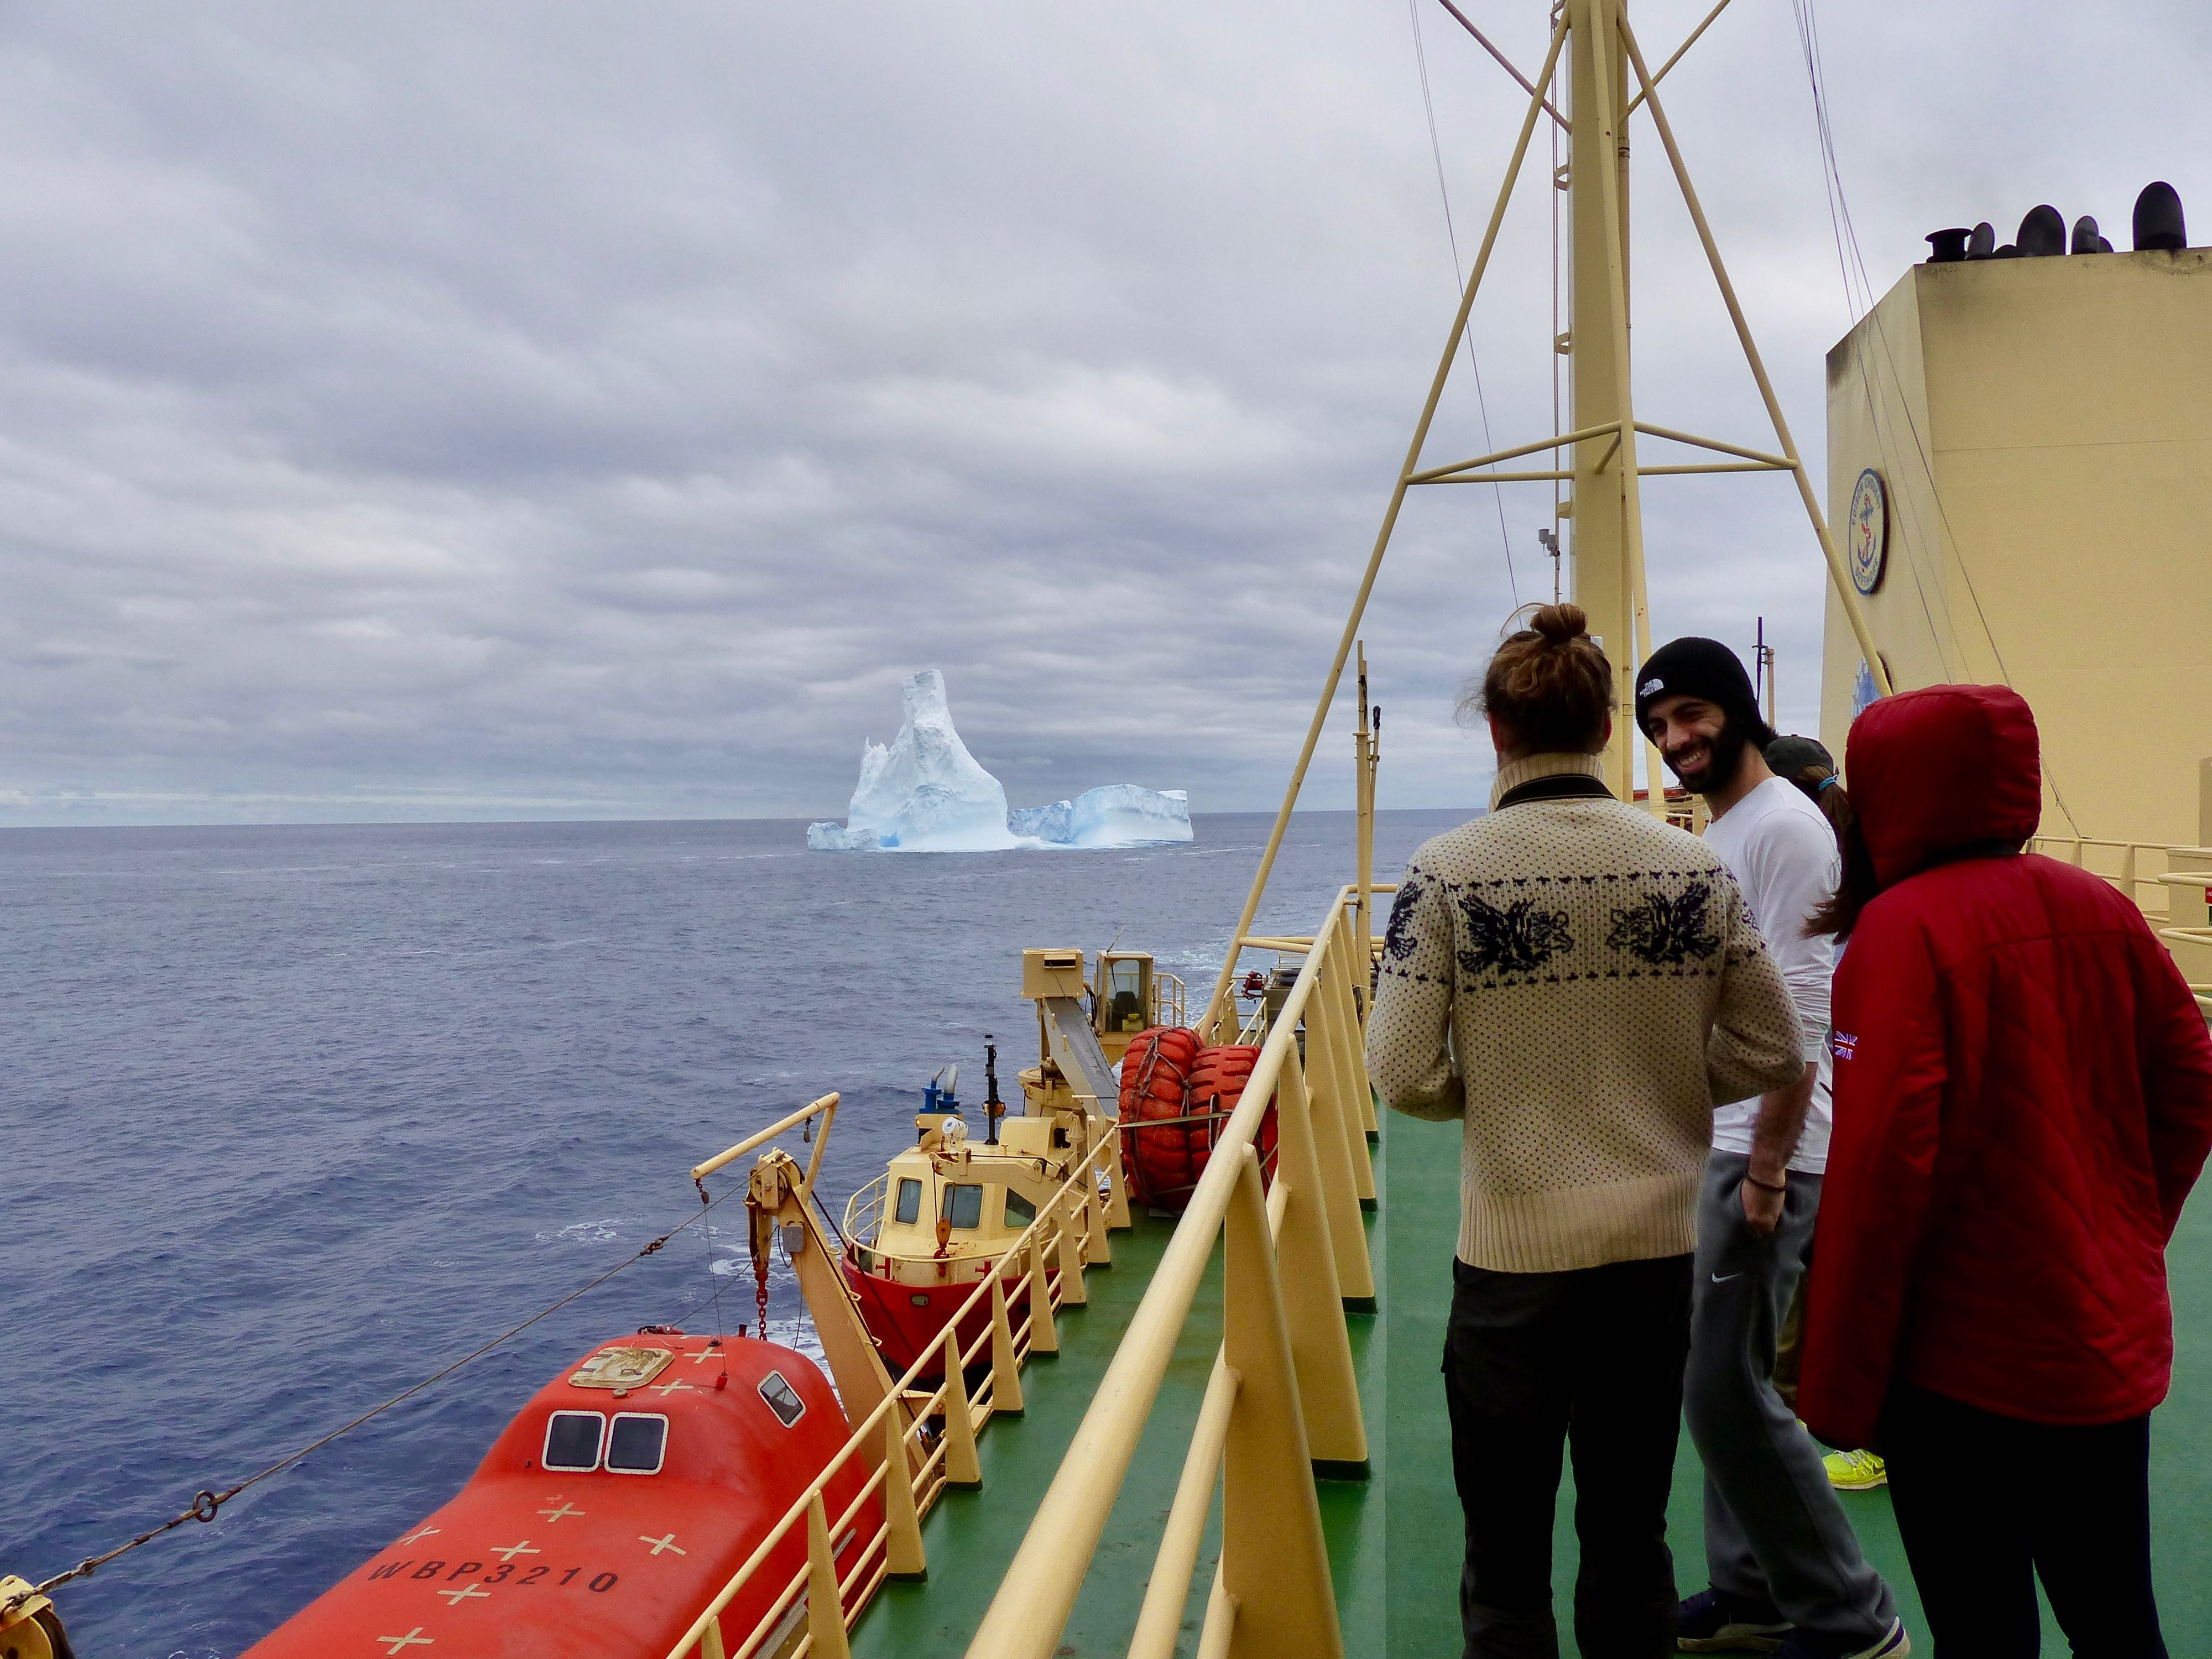 The iceberg as viewed with the R/V Palmer in the foreground.